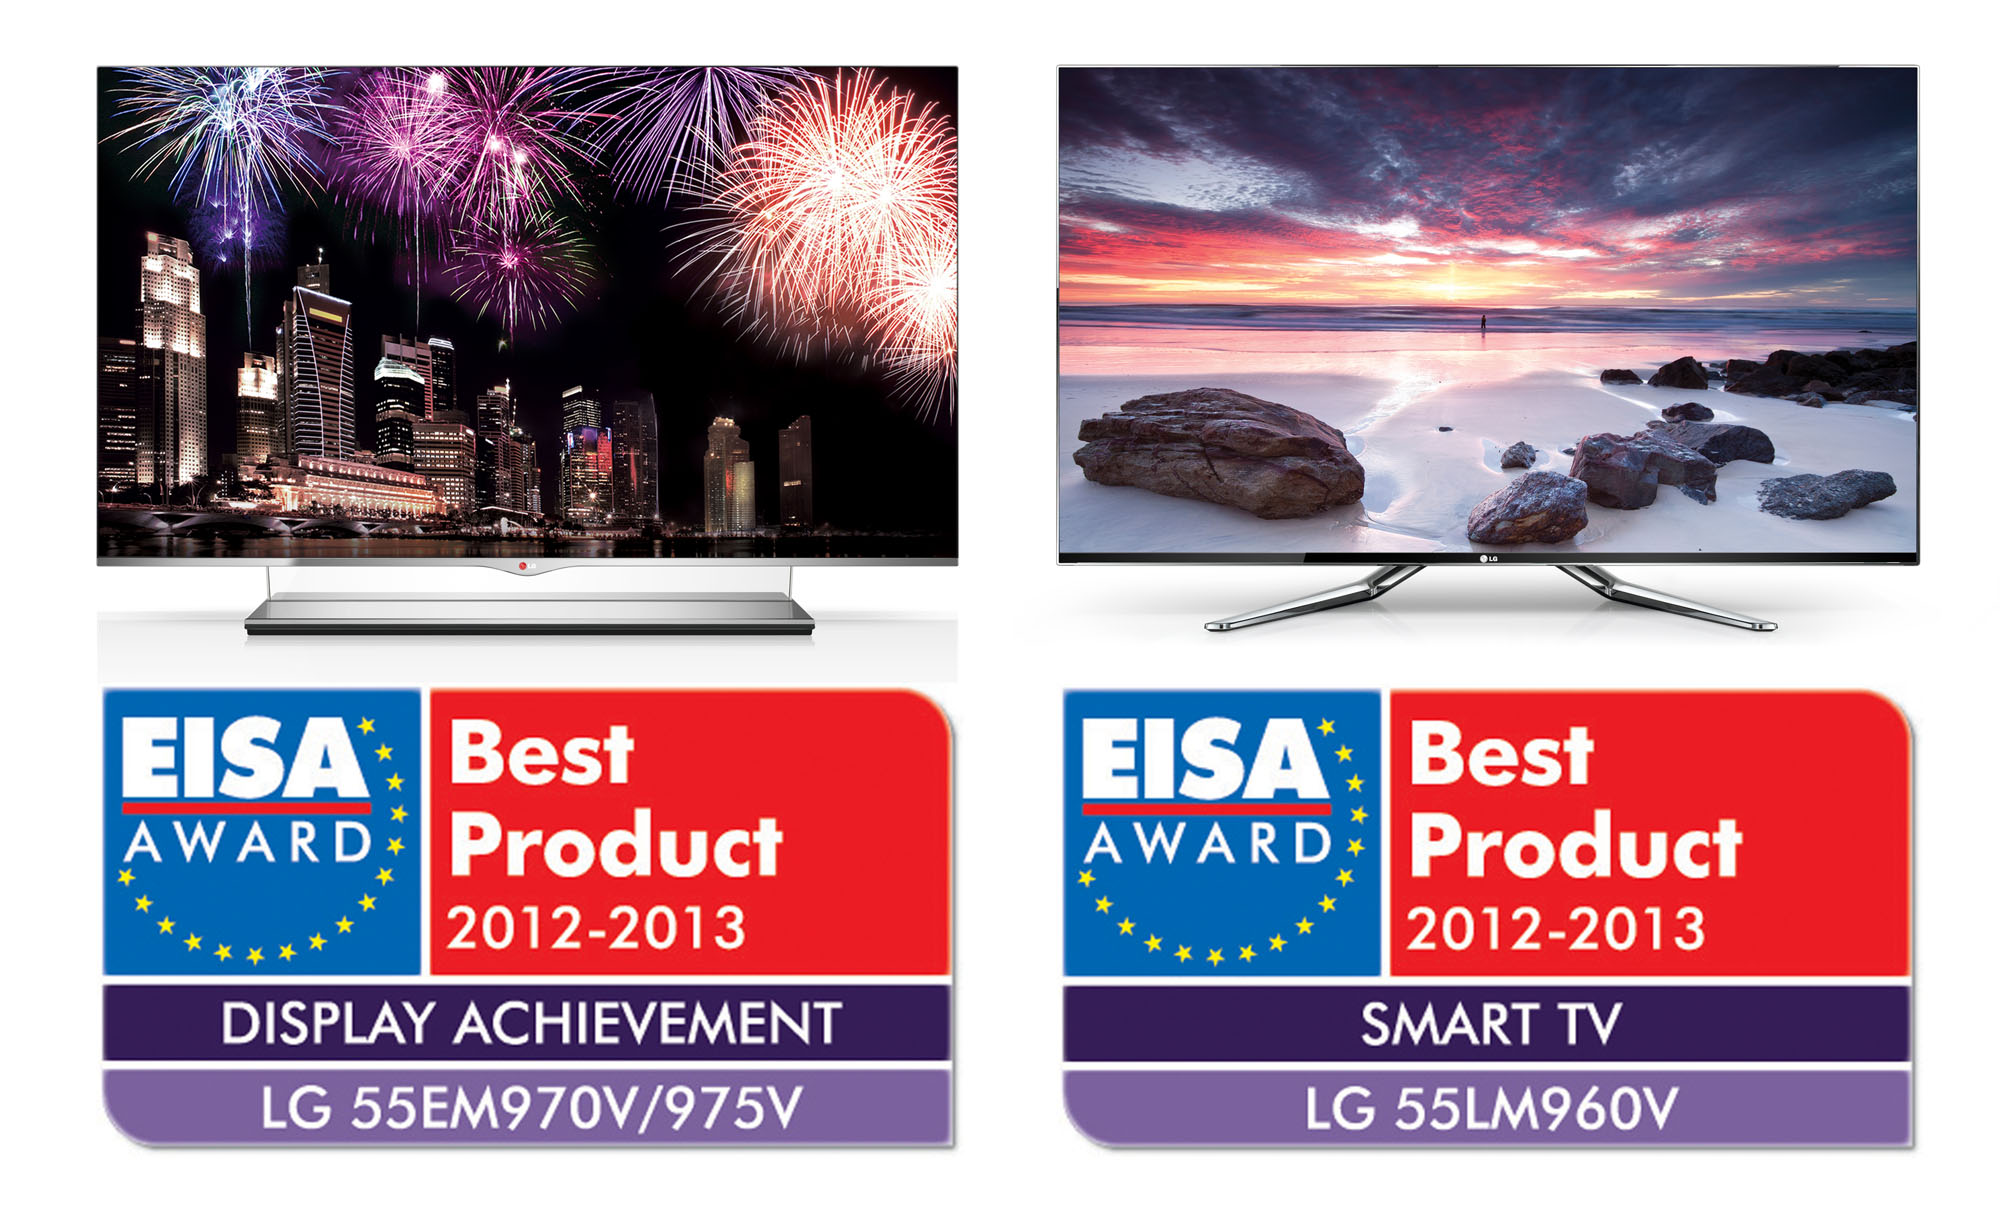 LG 55EM970V and 55LM960V placed on top of EISA Award Best Product logos for Display Achievement and Smart TV category